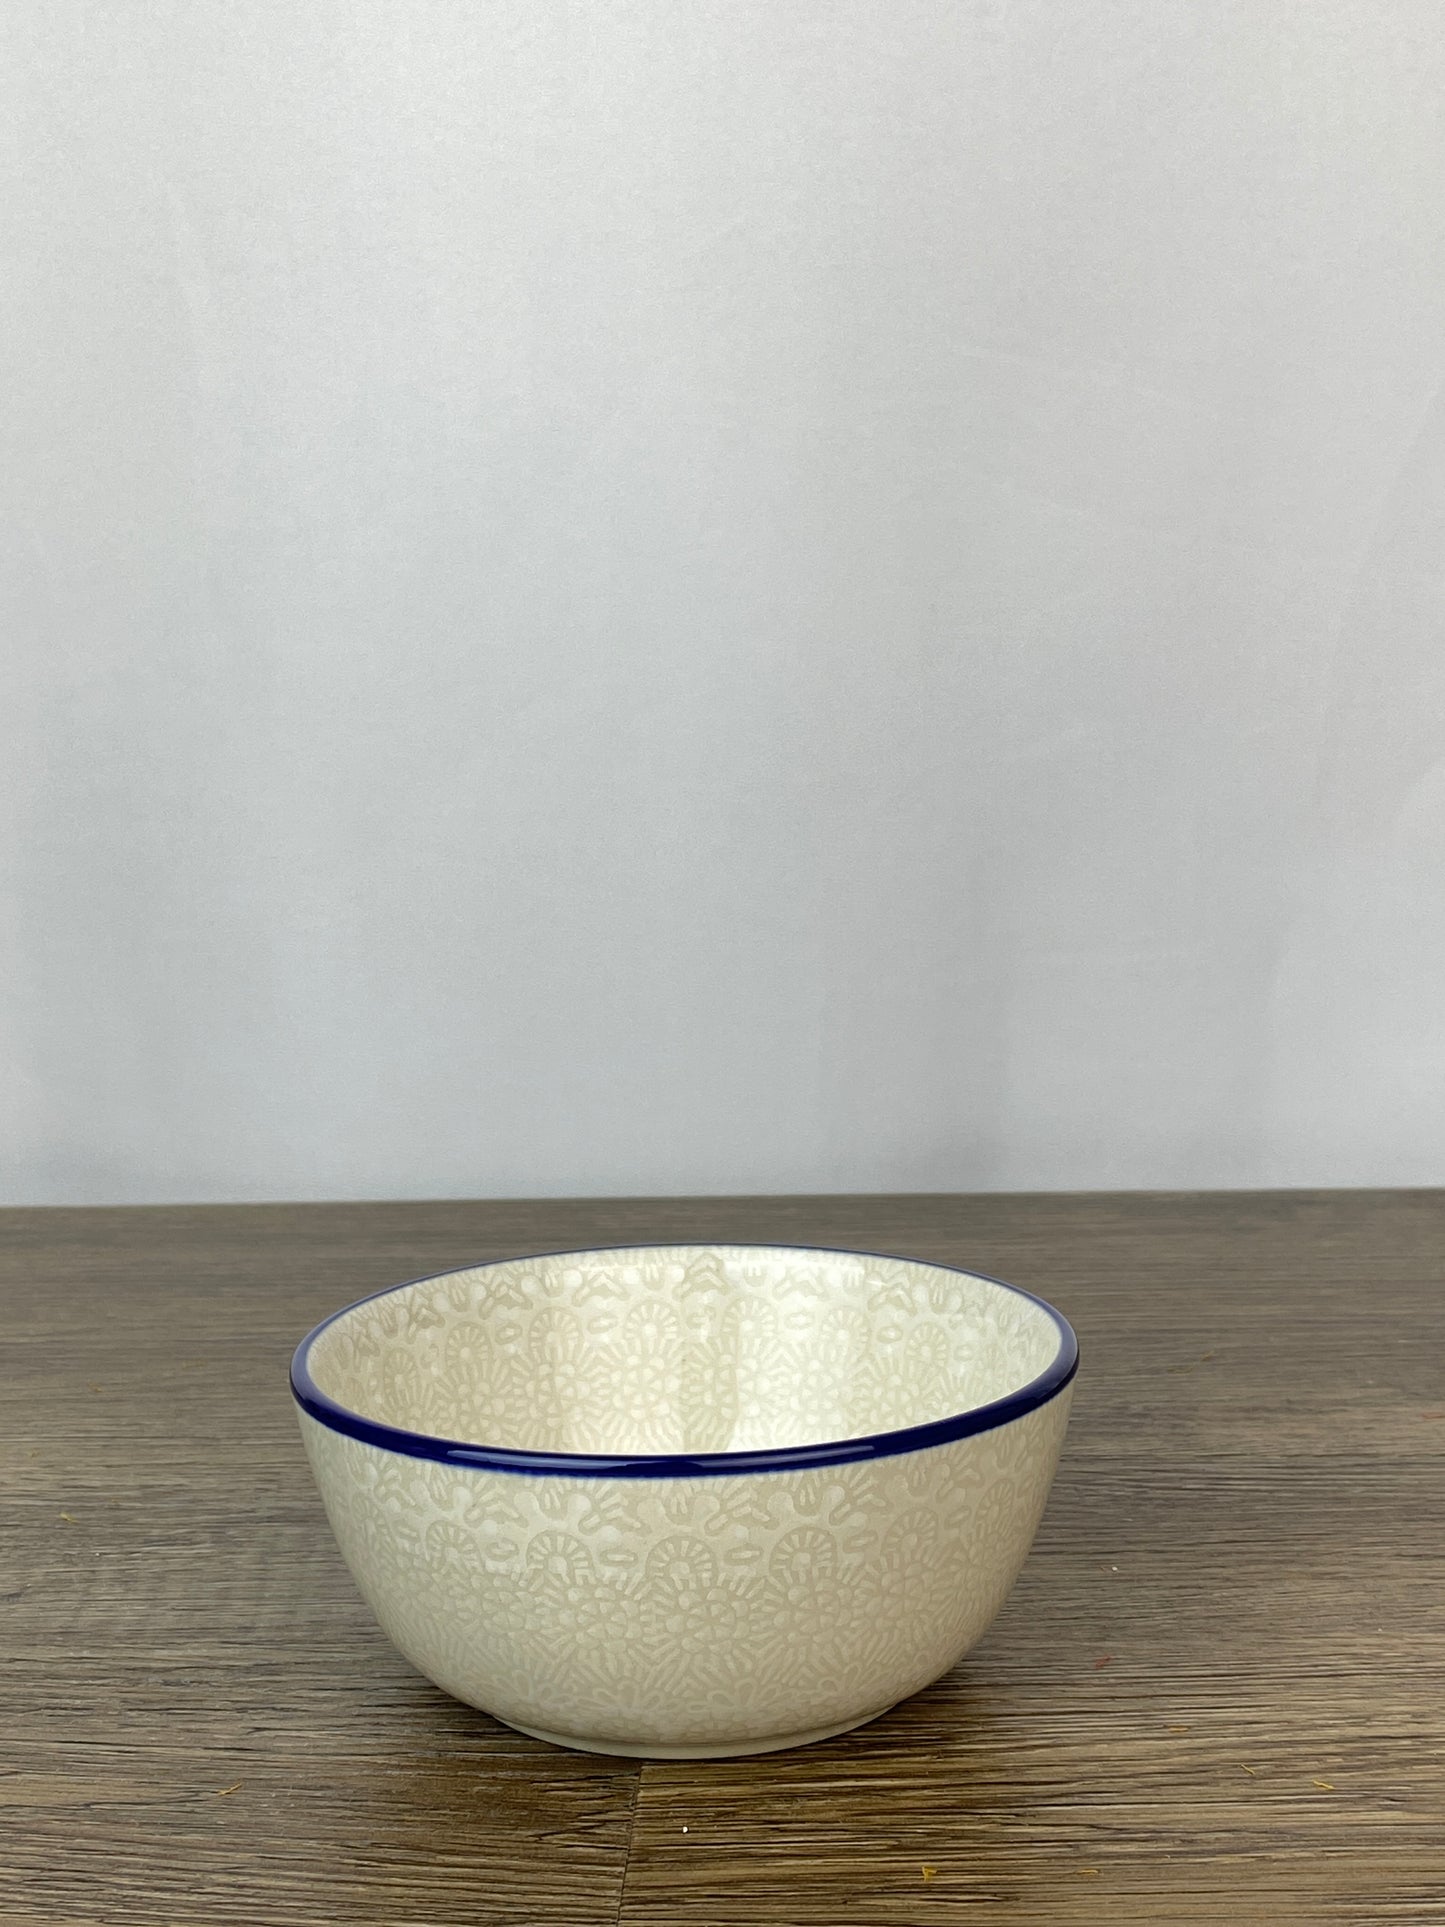 Small Cereal / Dessert Bowl - Shape 17 - Pattern 2324